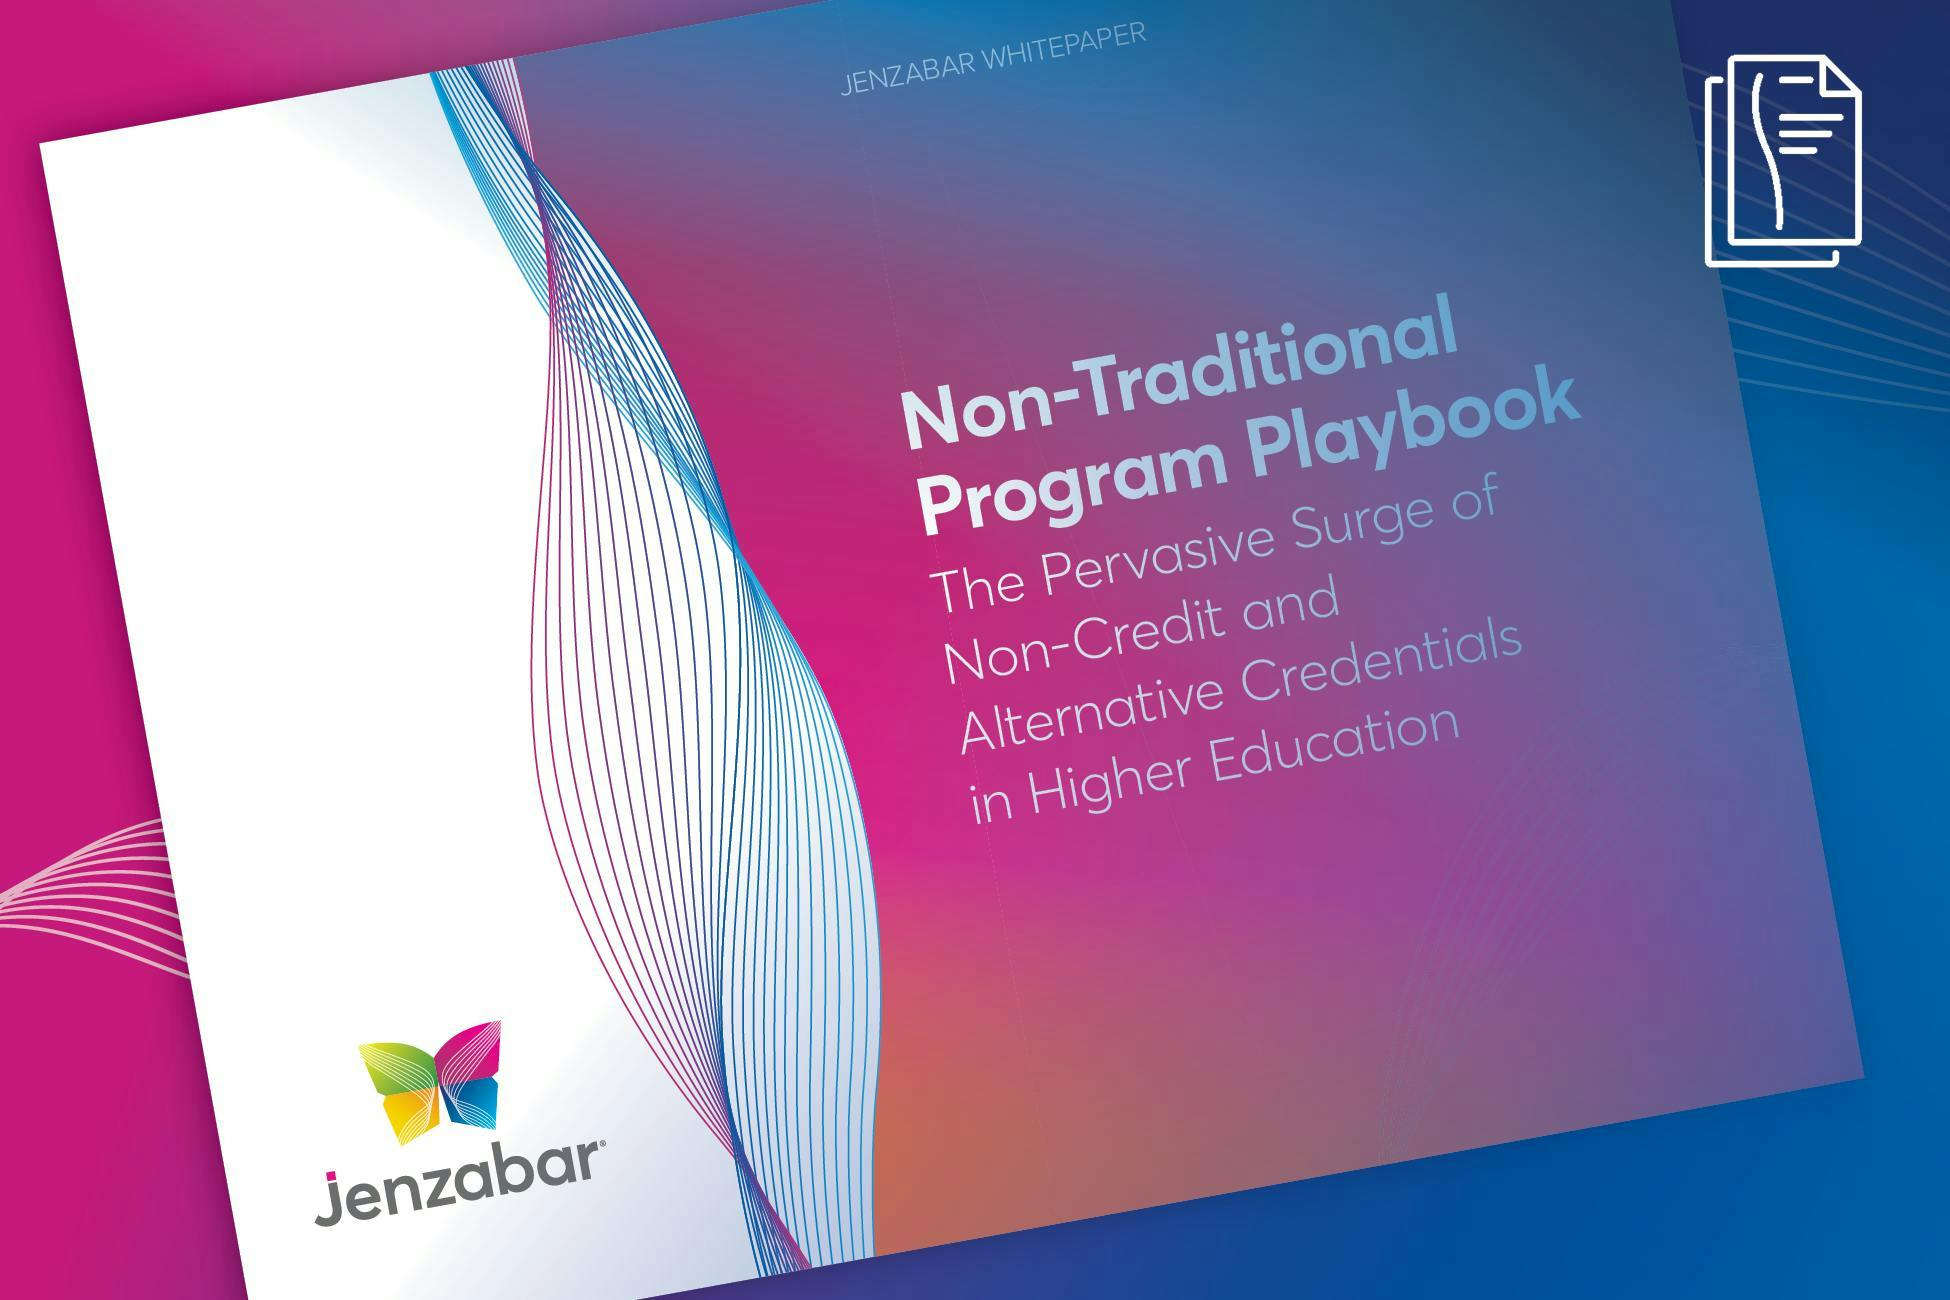 Non-Traditional Program Playbook: The Pervasive Surge of Non-Credit and Alternative Credentials in Higher Ed